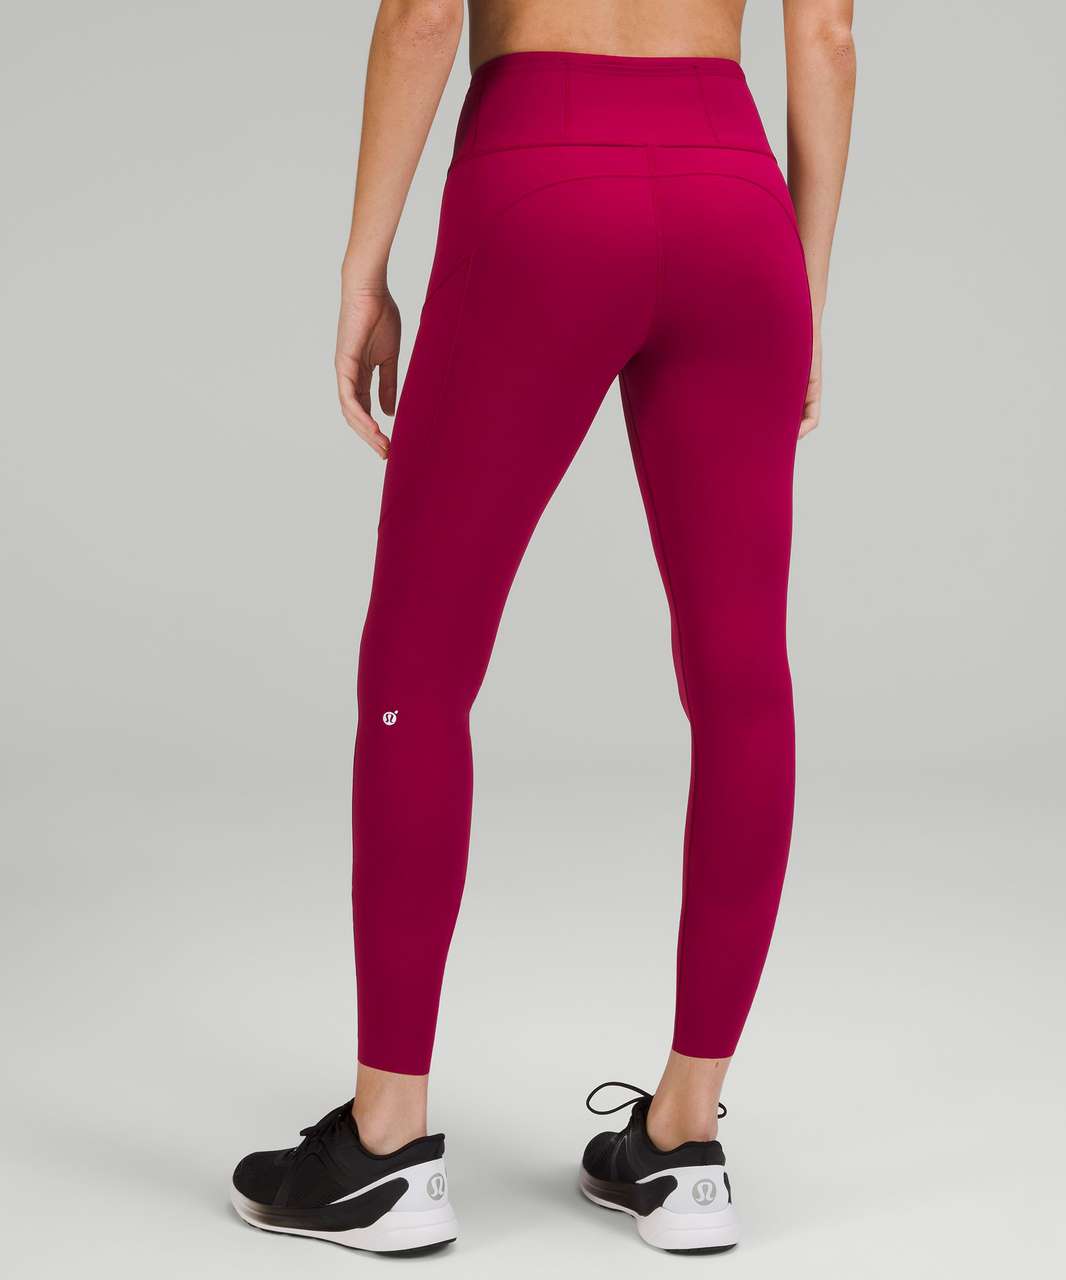 Lululemon Fast and Free High-Rise Crop 23" *Brushed Nulux - Pomegranate